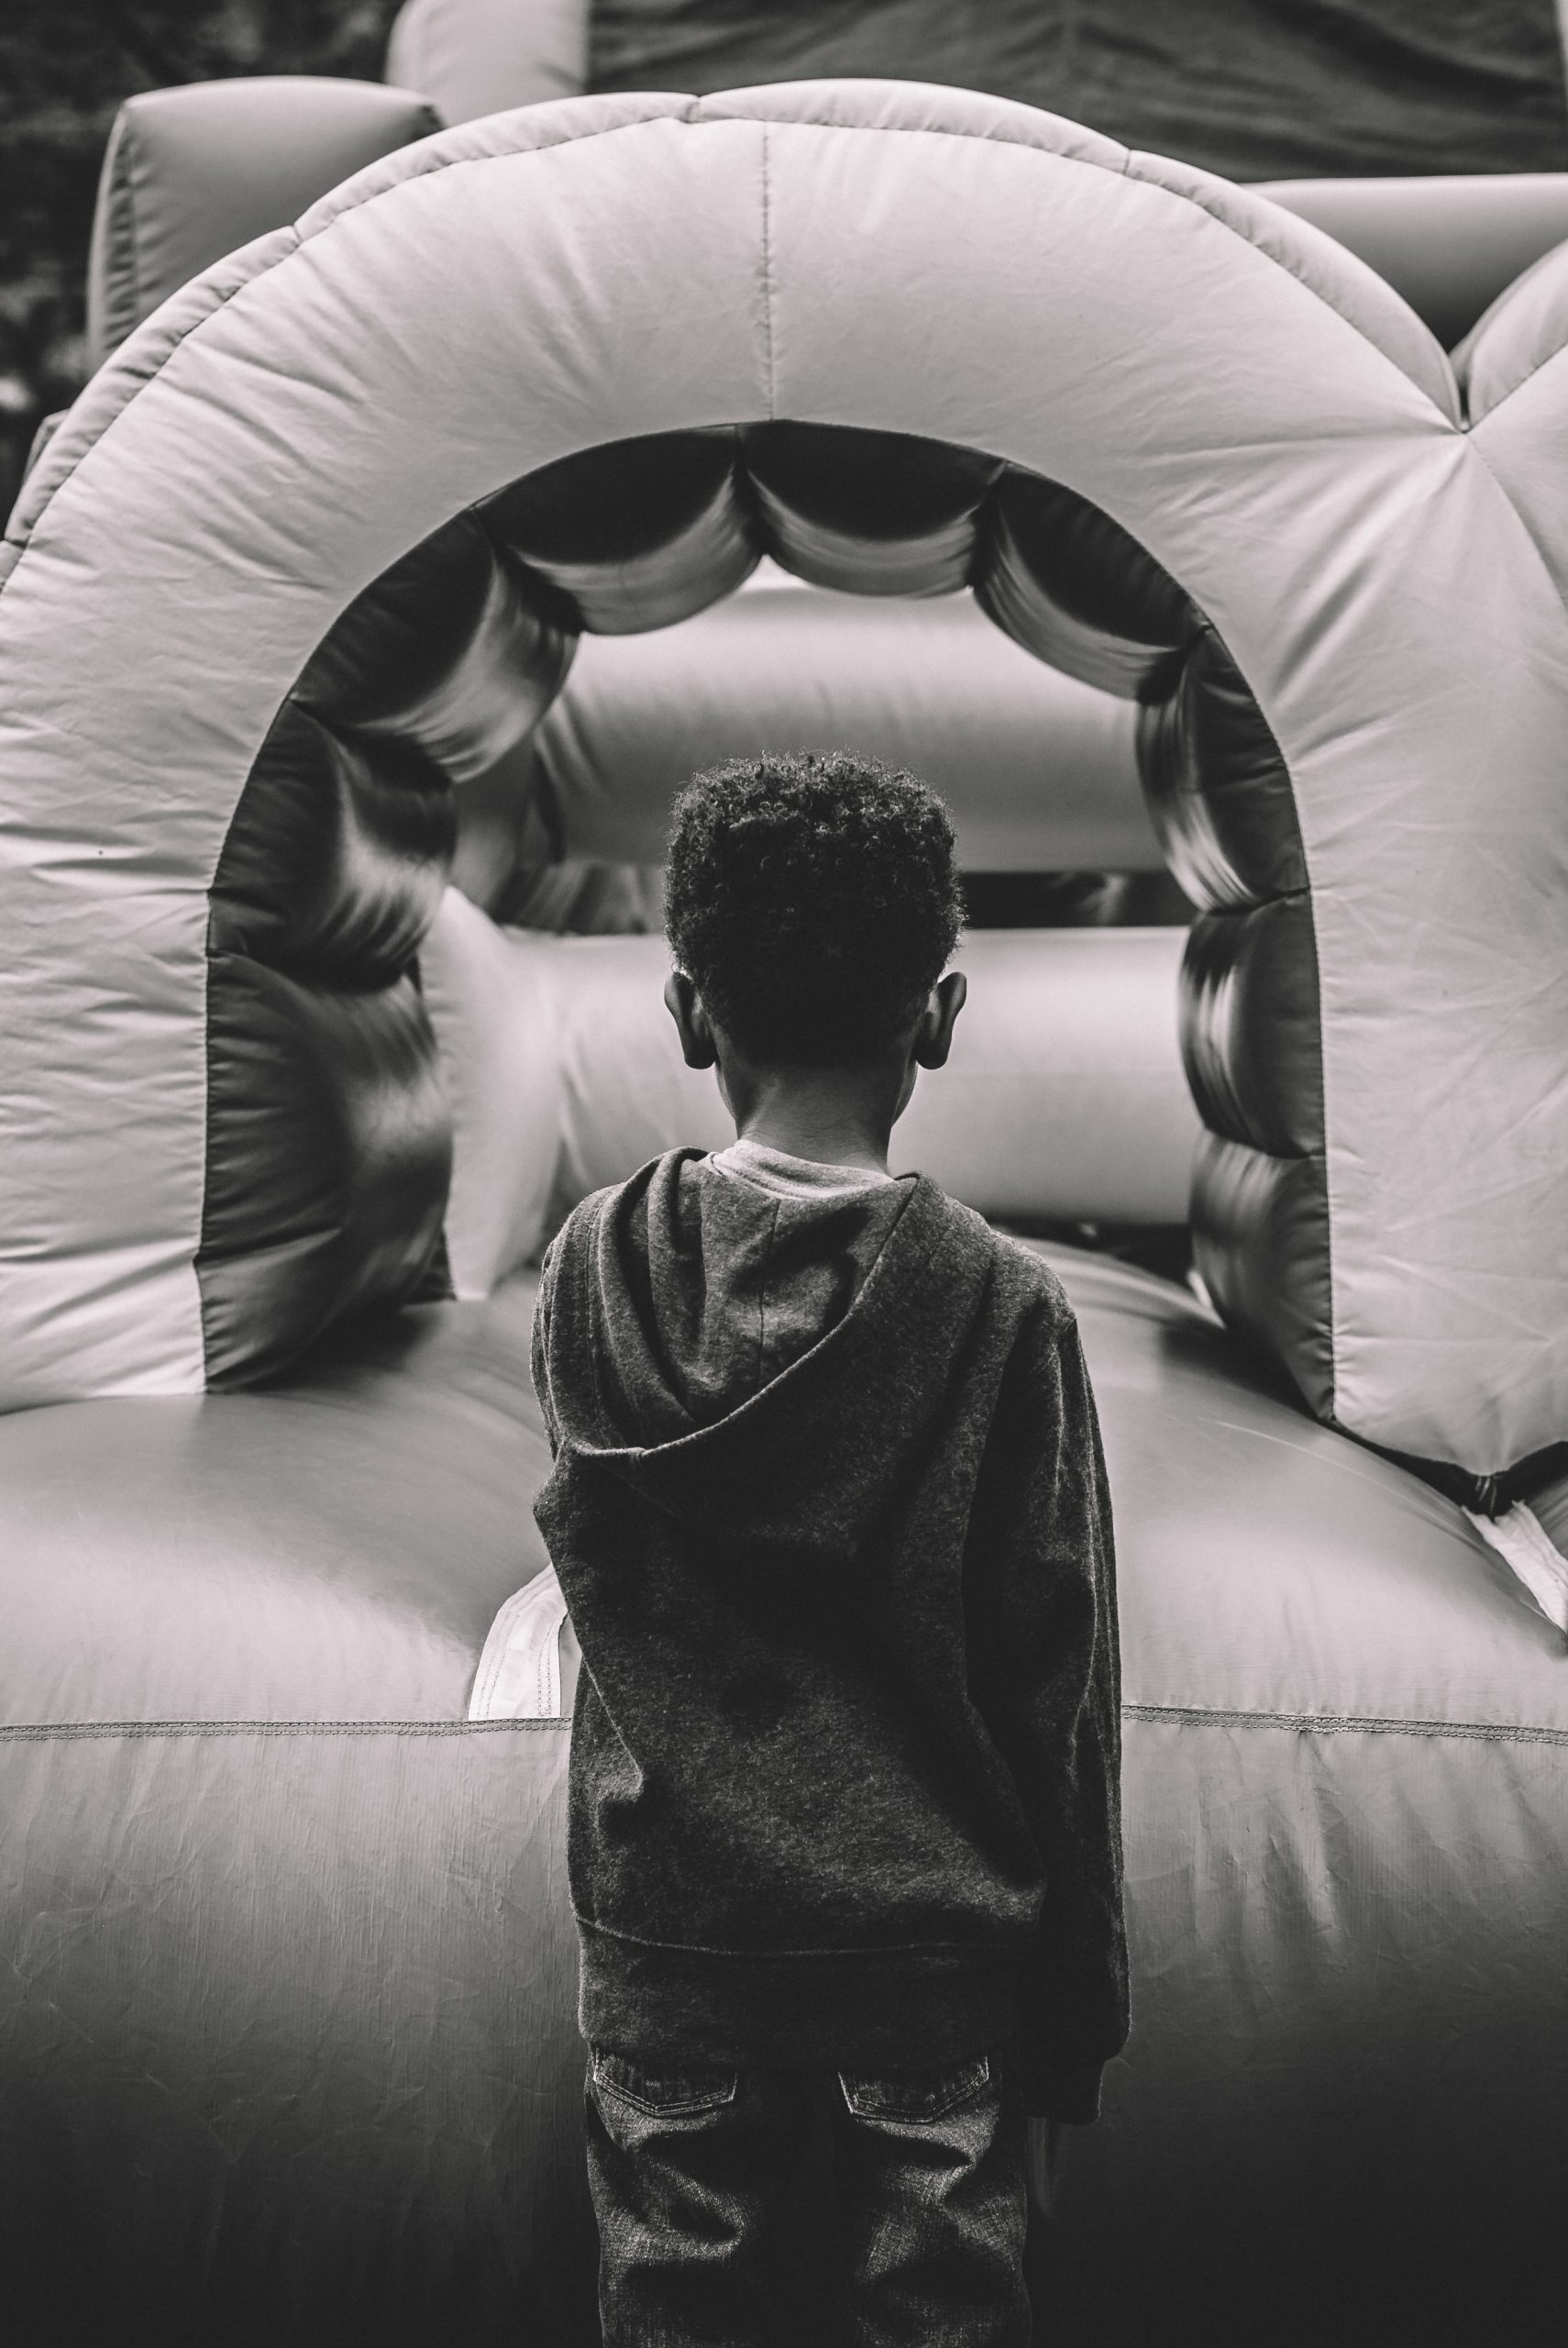 Bounce house rental in Pittsburgh